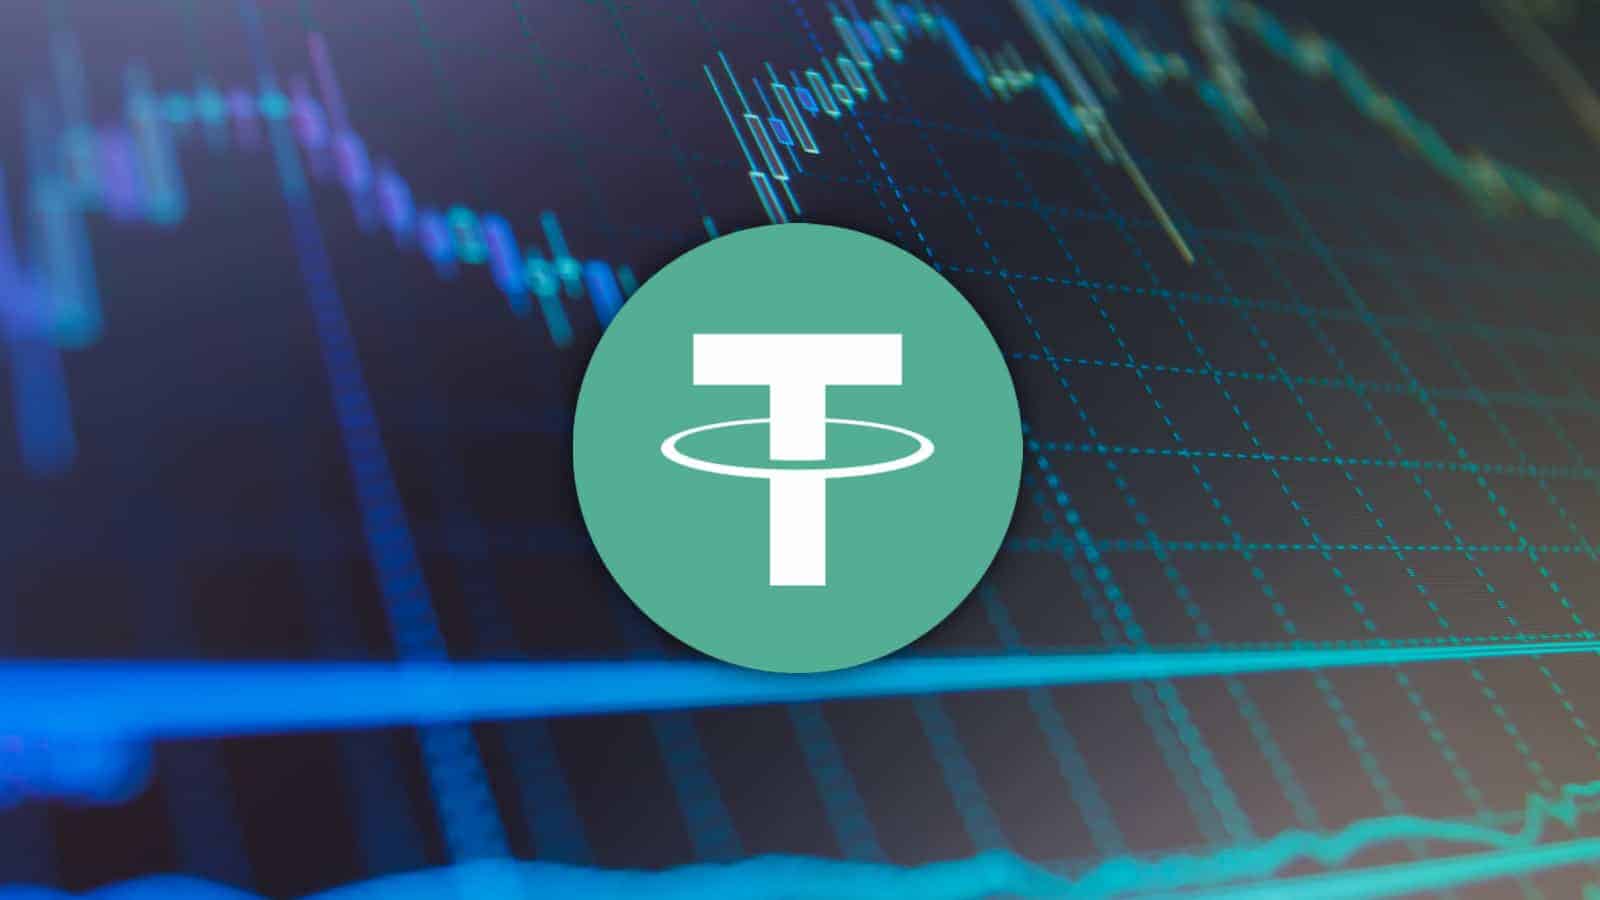 Tether (USDT) Leads Top 10 Crypto Market with 7 Day Price Increase